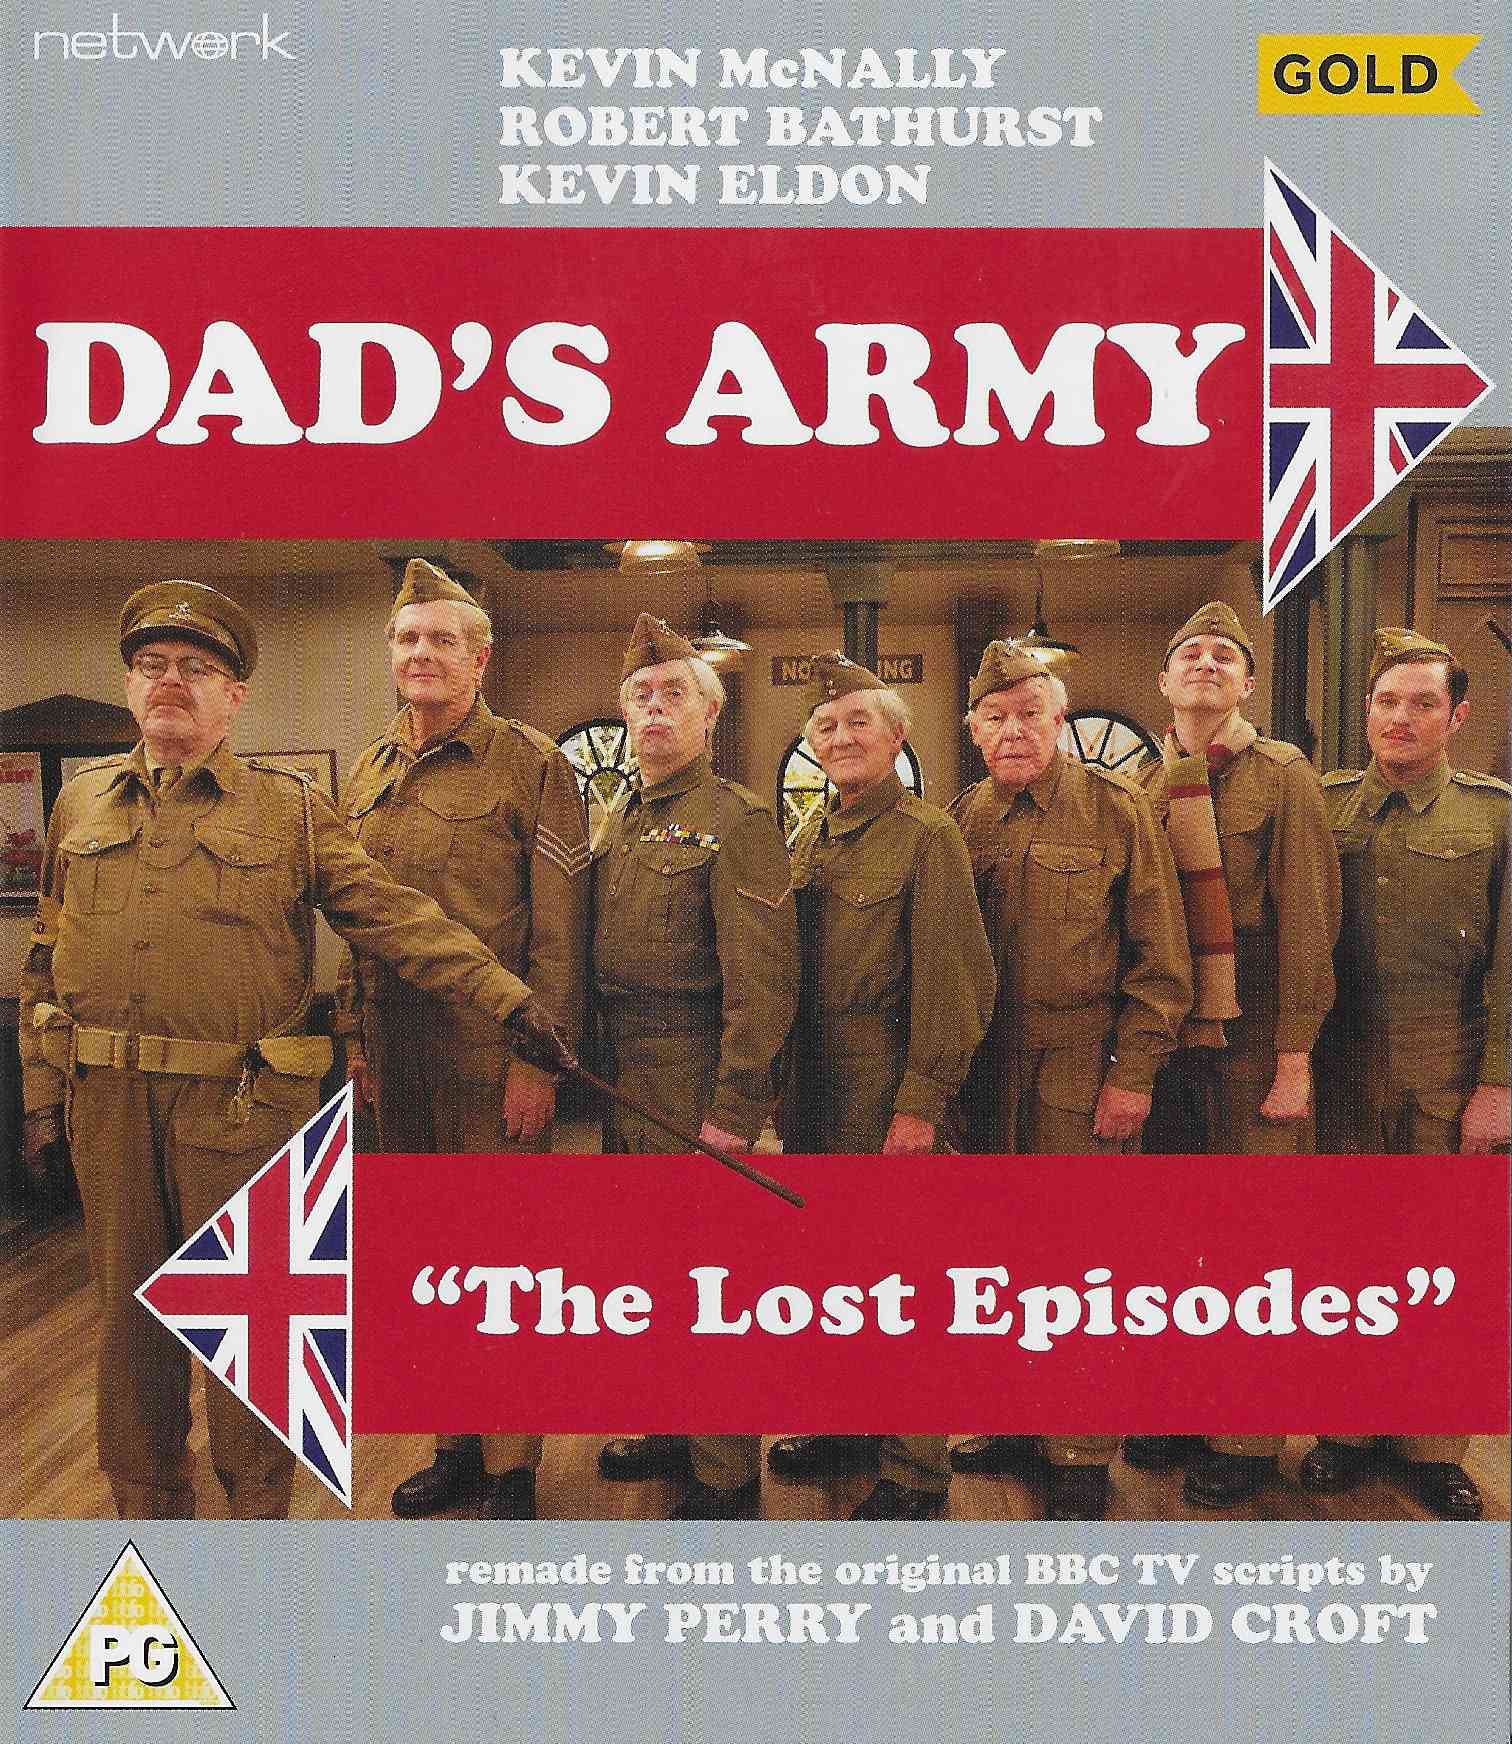 Picture of 7958306 Dad's army - The lost episodes by artist Jimmy Perry / David Croft from ITV, Channel 4 and Channel 5 blu-rays library